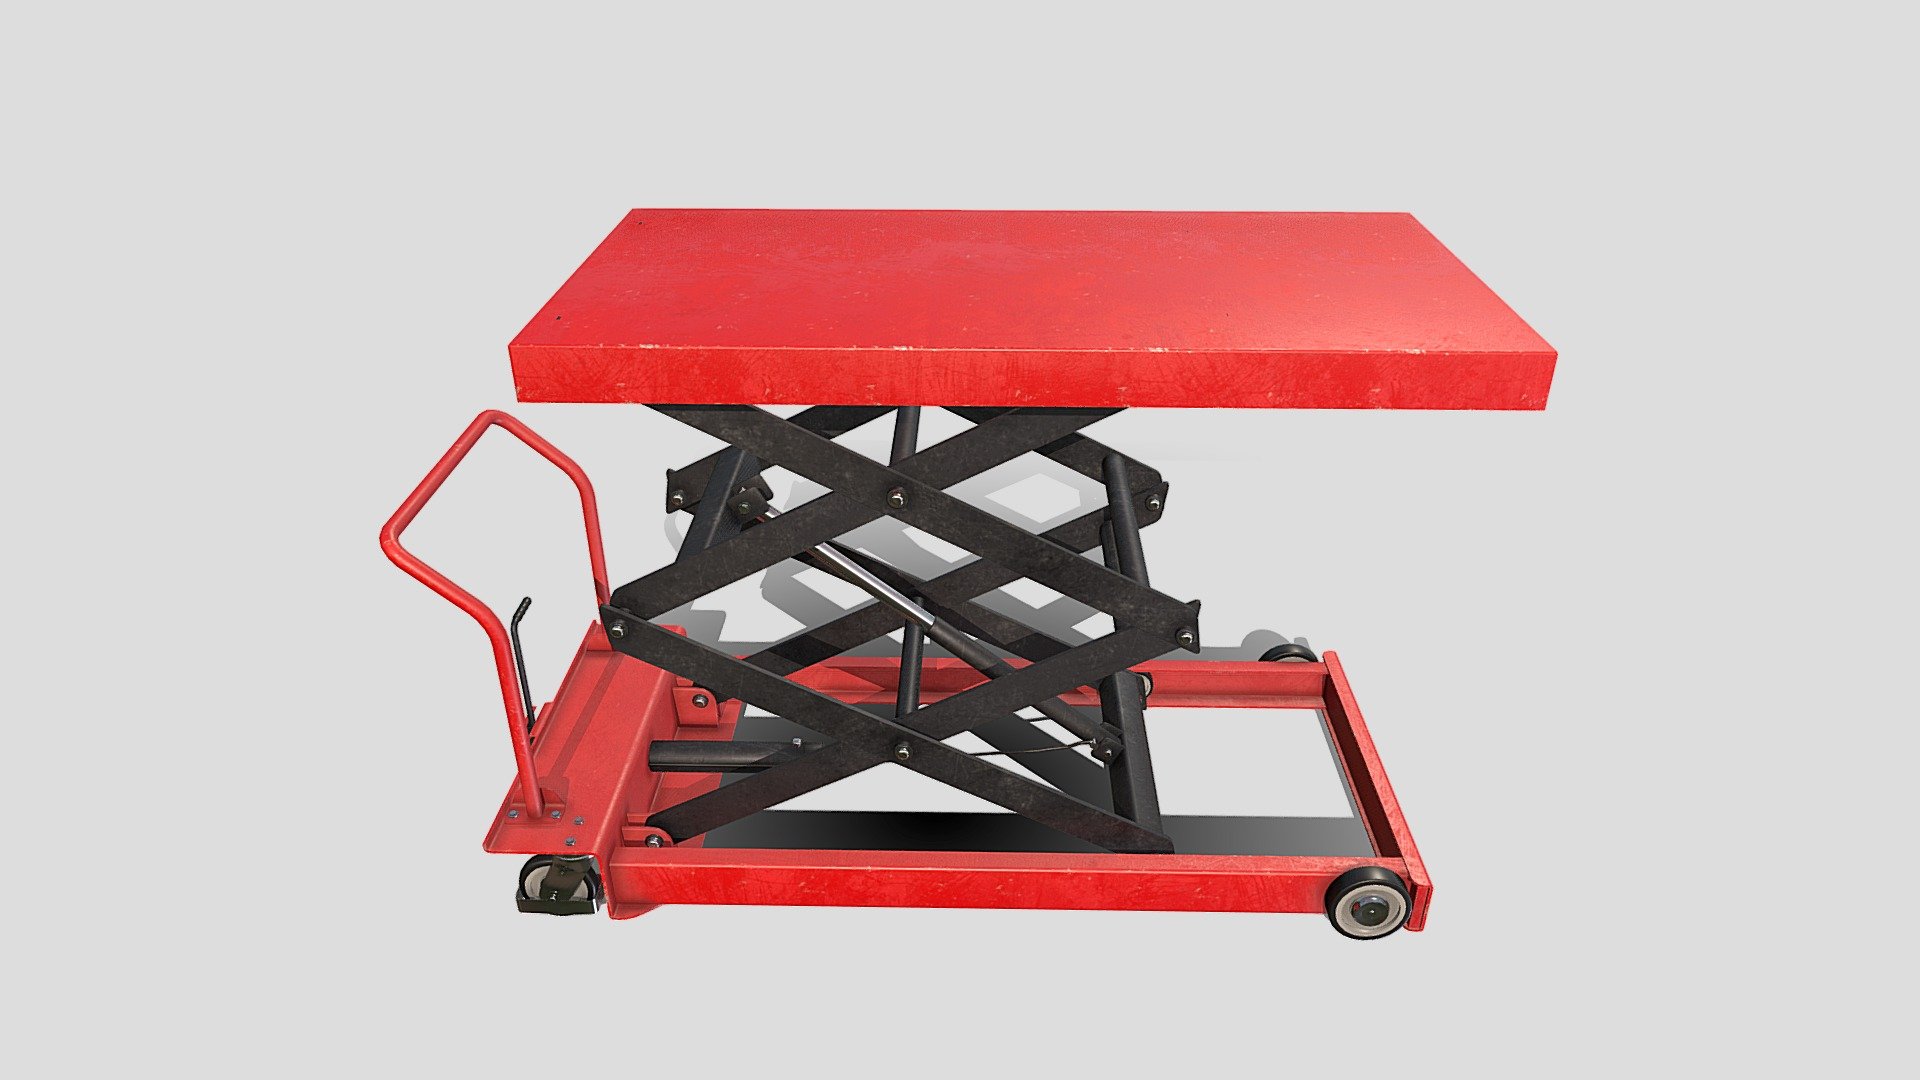 Animated scissor lift 3d model rendered with Cycles in Blender, as per seen on attached images. 
The animation consists of the lift elevating over 72 frames(it can easily be scaled to as many frames needed). It is made using an armature and 9 bones.
The model is scaled to real-life scale.

File formats:
-.blend, rendered with cycles, as seen in the images;
-.blend, animated, rendered with cycles, as seen in the images;
-.fbx, animated, with materials applied;
-.fbx, with materials applied;
-.obj, with materials applied;
-.dae, with materials applied;
-.stl;

Files come named appropriately and split by file format.

3D Software:
The 3D model was originally created in Blender 3.1 and rendered with Cycles.

Materials and textures:
The models have materials applied in all formats, and are ready to import and render.
Materials are image based using PBR, the model comes with five 4k png image textures.

For any problems please feel free to contact me.

Don't forget to rate and enjoy! - Animated Scissor Lift Table Red - Buy Royalty Free 3D model by dragosburian 3d model